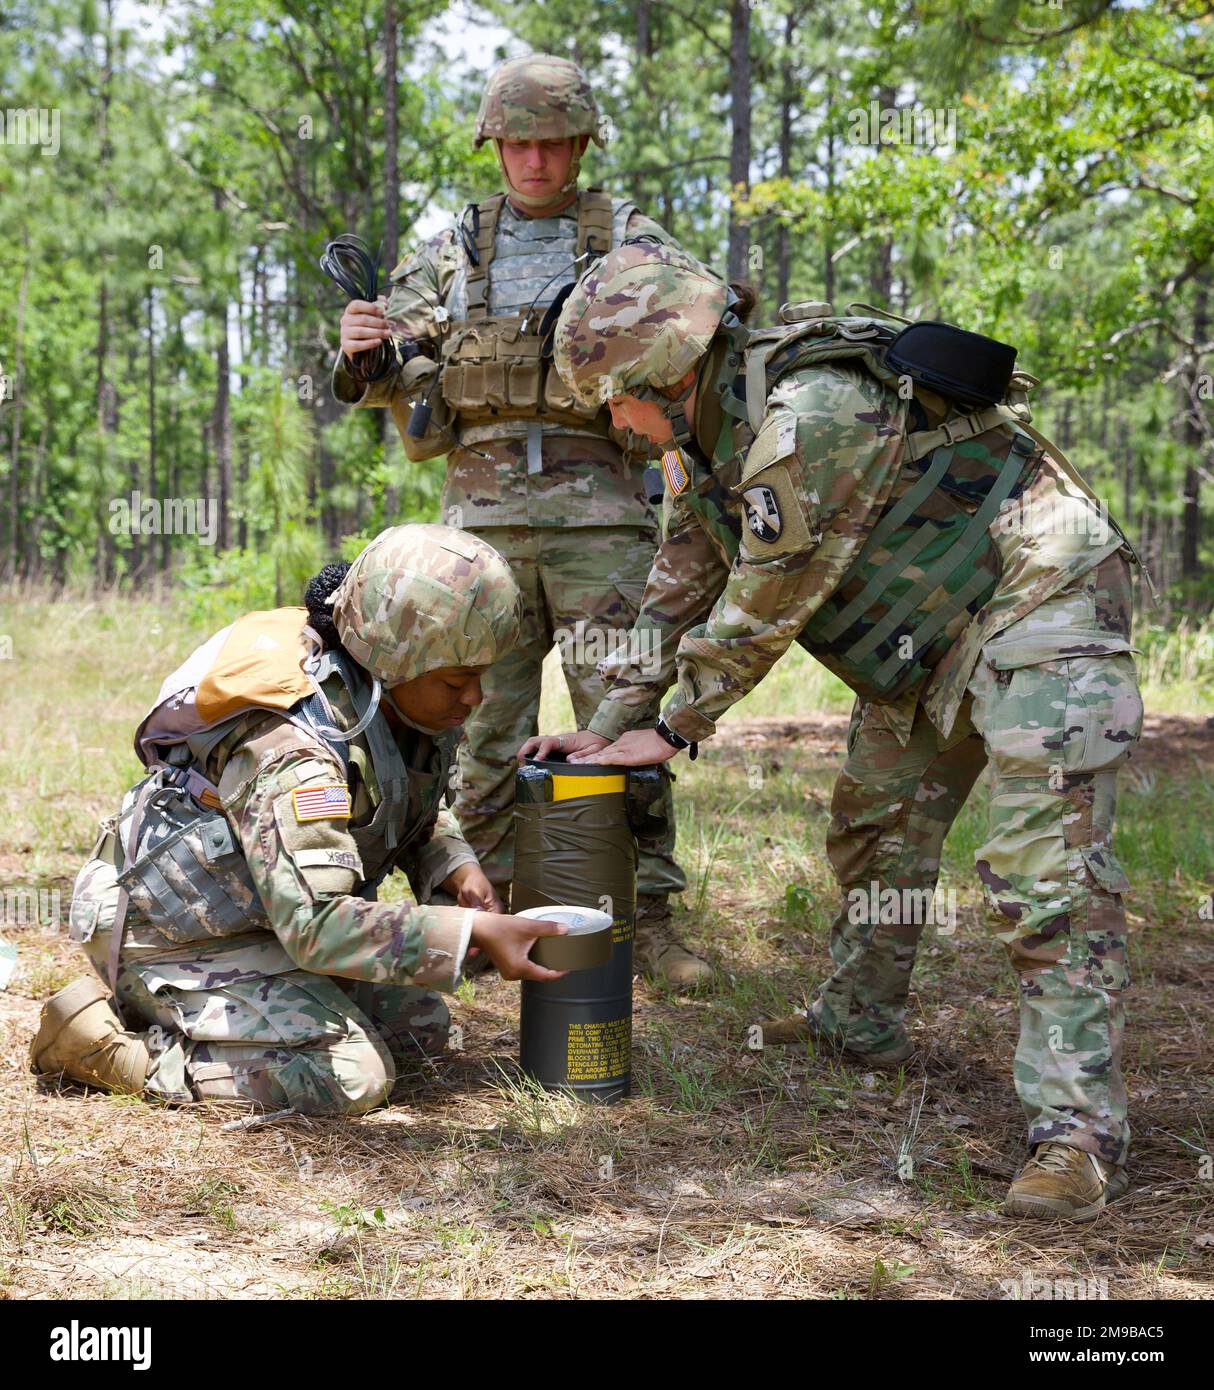 Soldiers with the 61st Troop Command secure explosives in the demolition site in Camp Shelby, Mississippi, May 15, 2022. Engineers conduct route clearance operations training to uncover improvised explosive devices in a controlled environment. Stock Photo